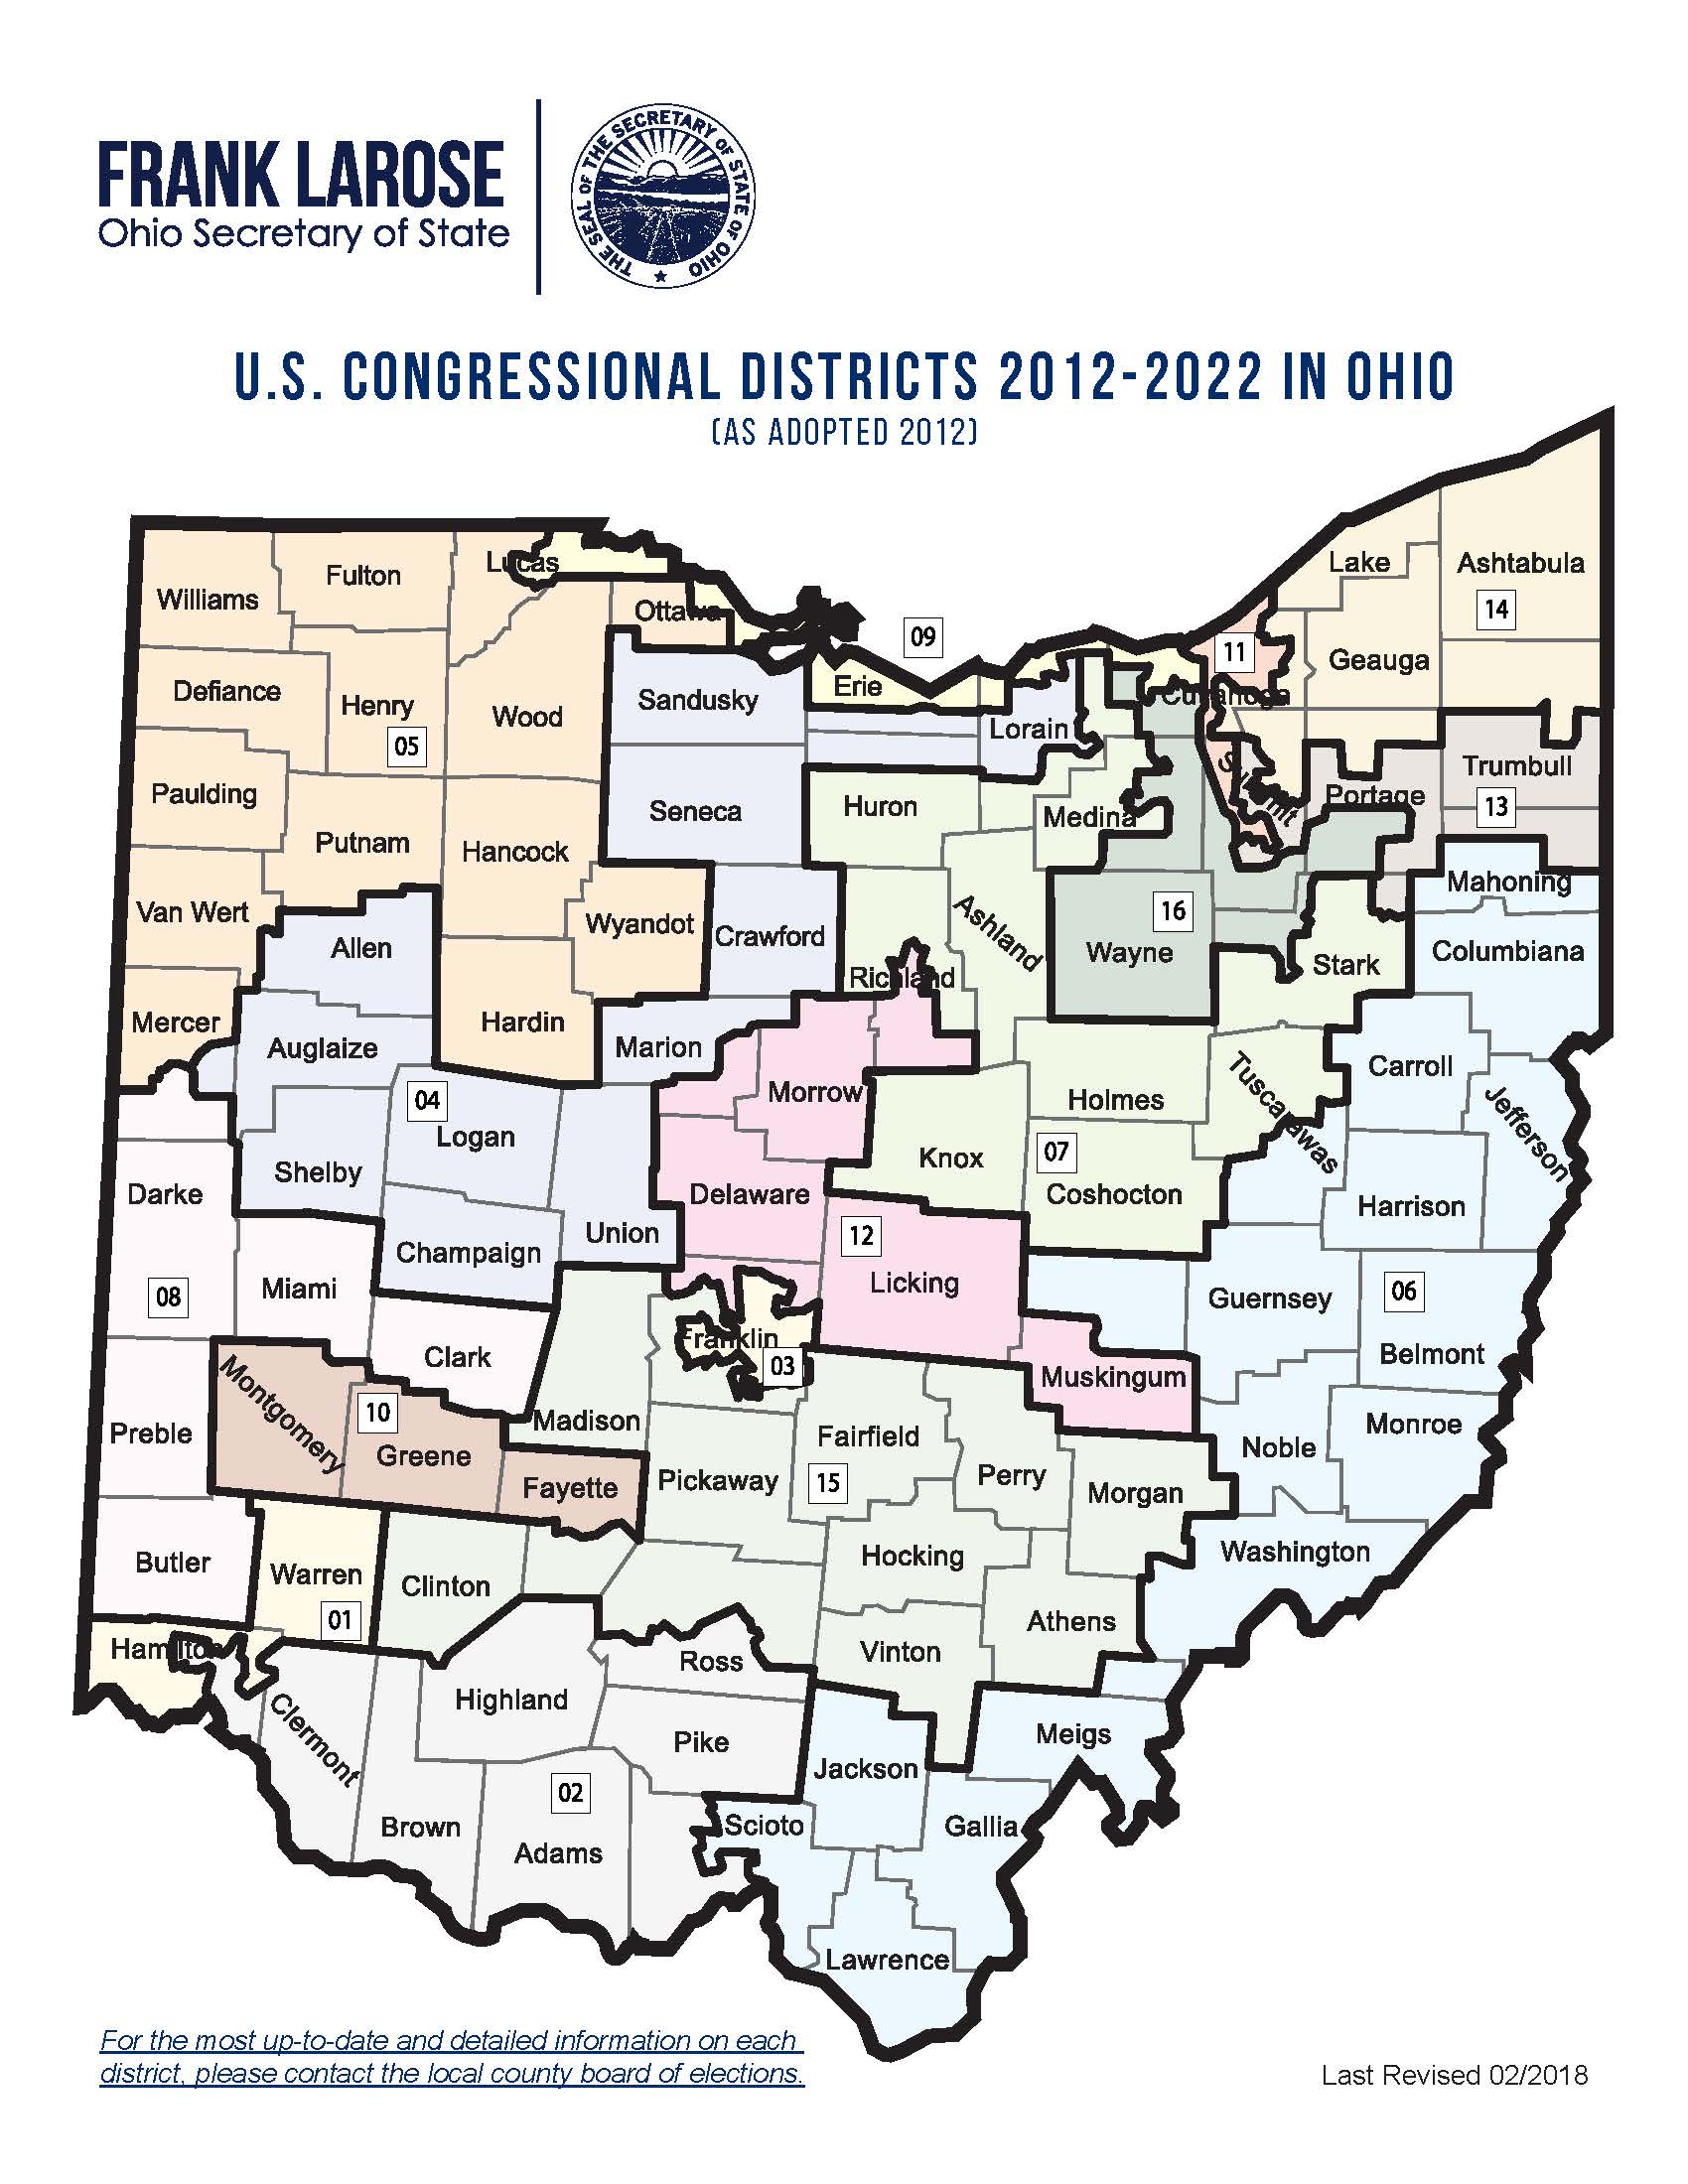 State redistricting information for Ohio